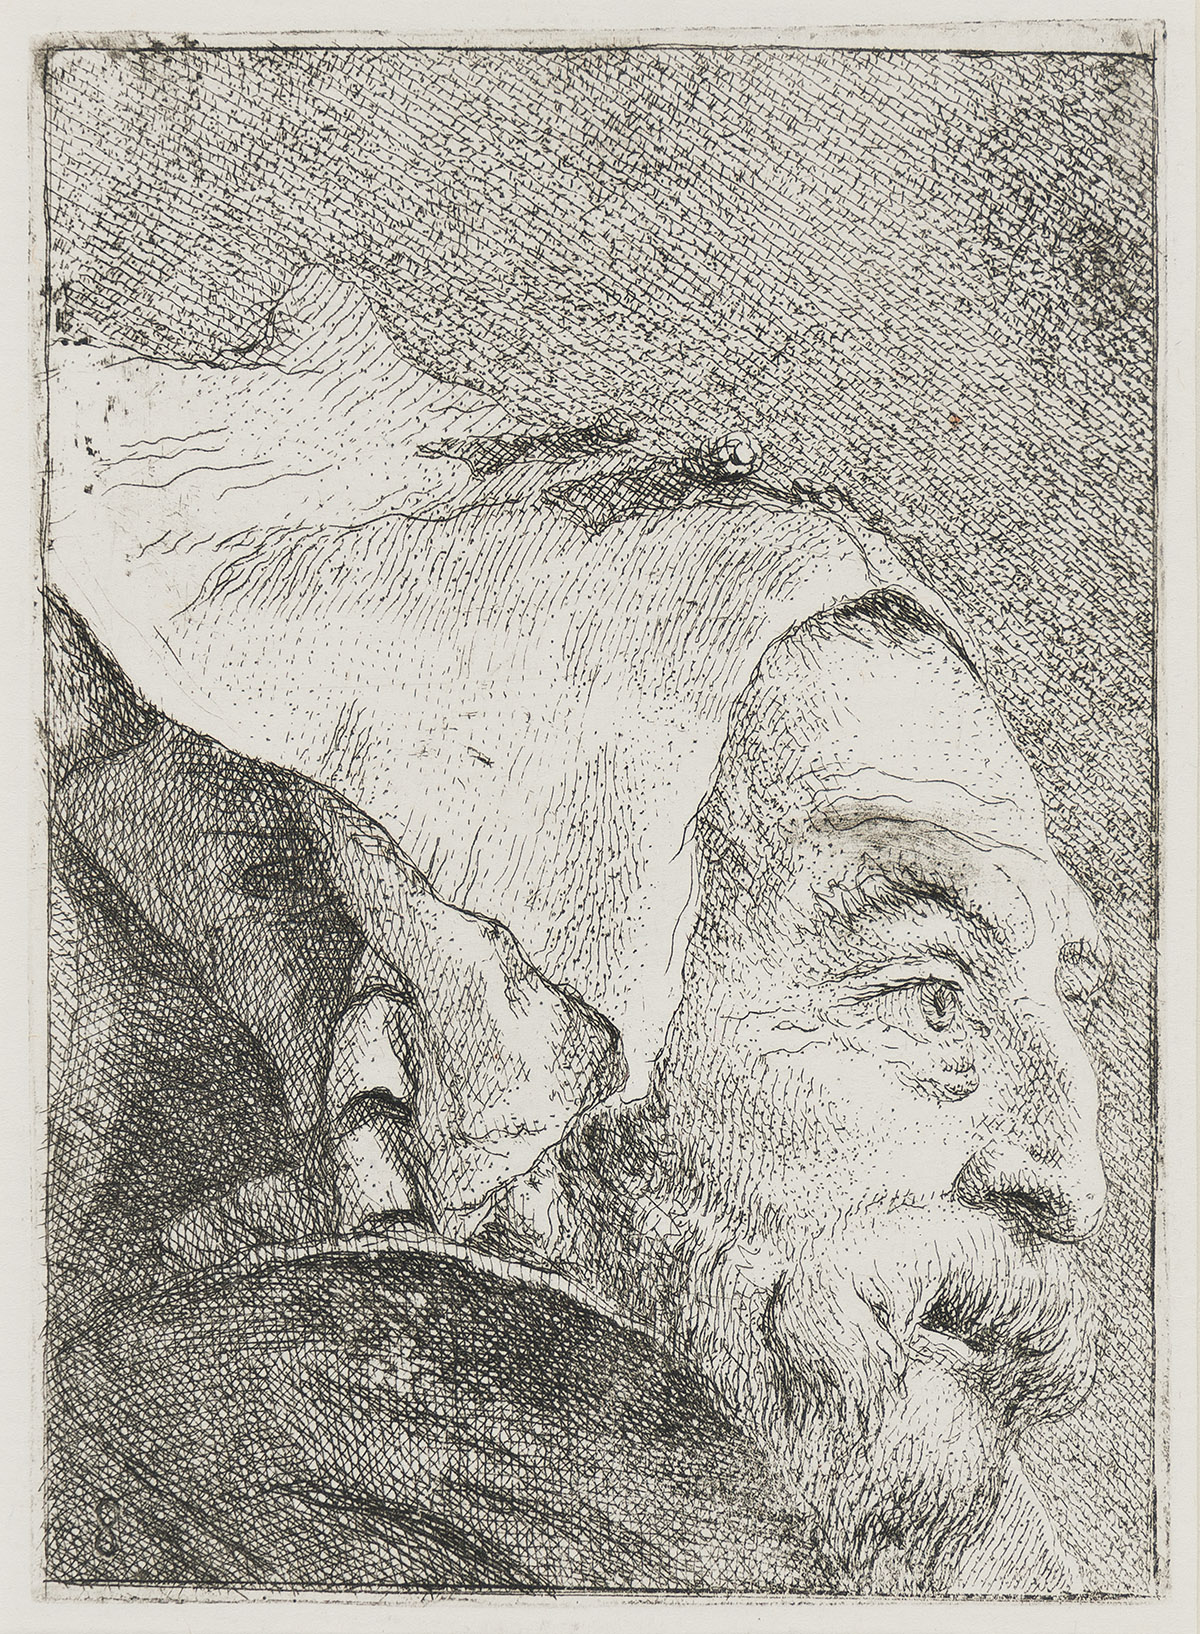 GIOVANNI D. TIEPOLO Group of 5 etchings from Raccolta di Teste.